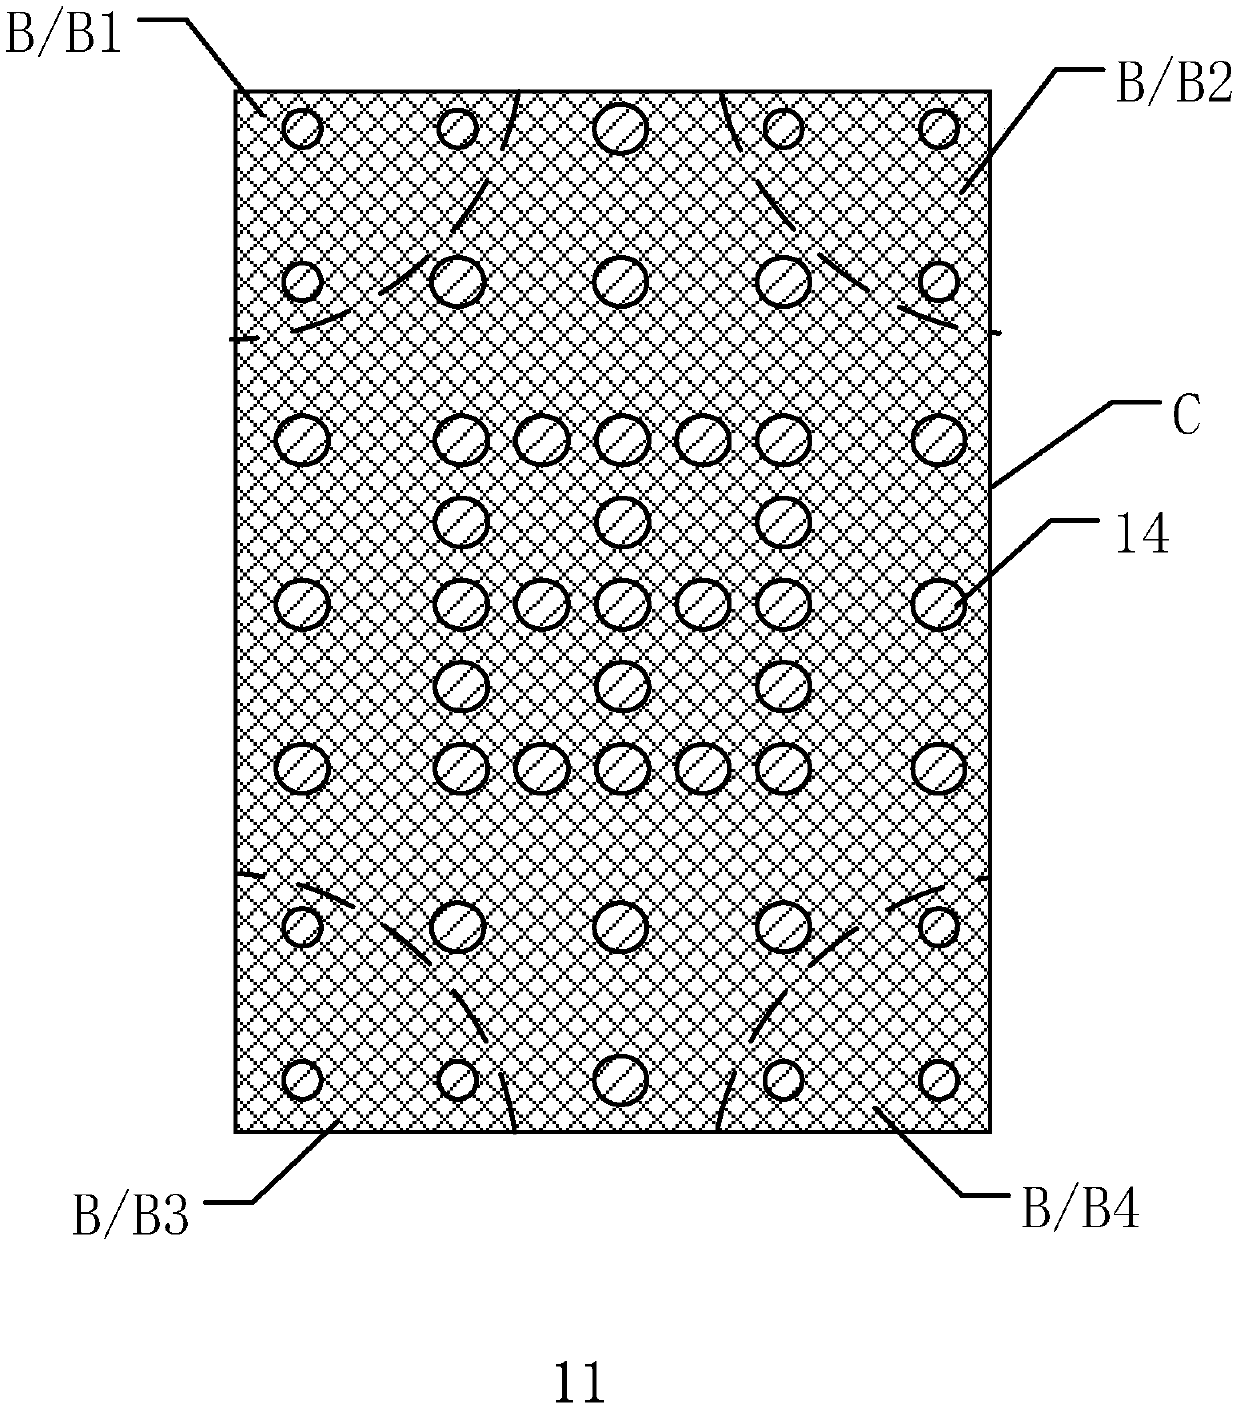 Hook face display panel and hook face display device